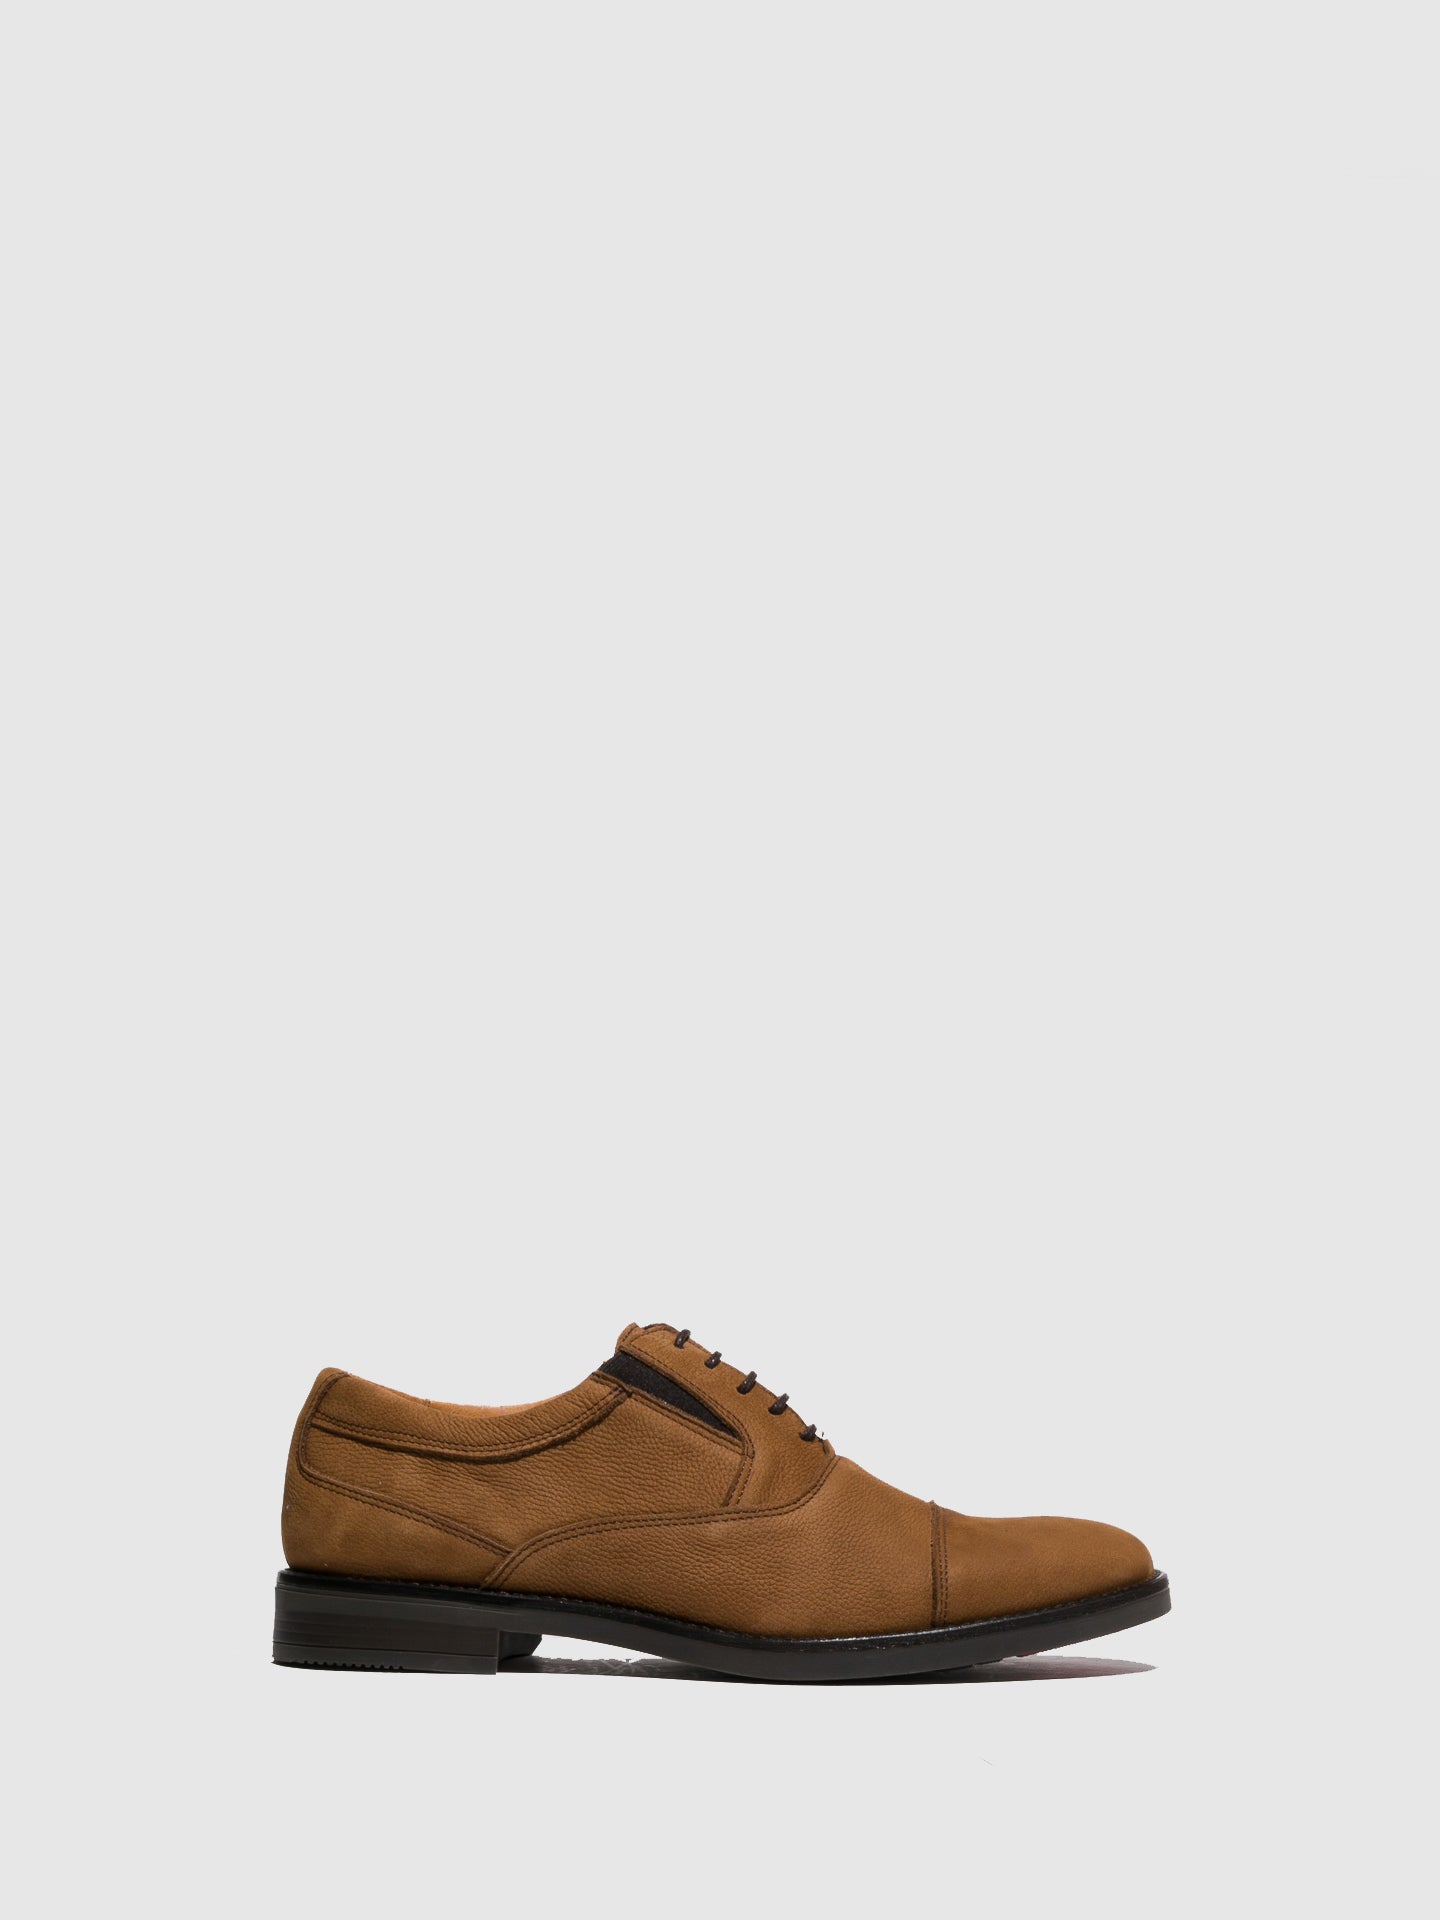 Foreva Camel Lace-up Shoes